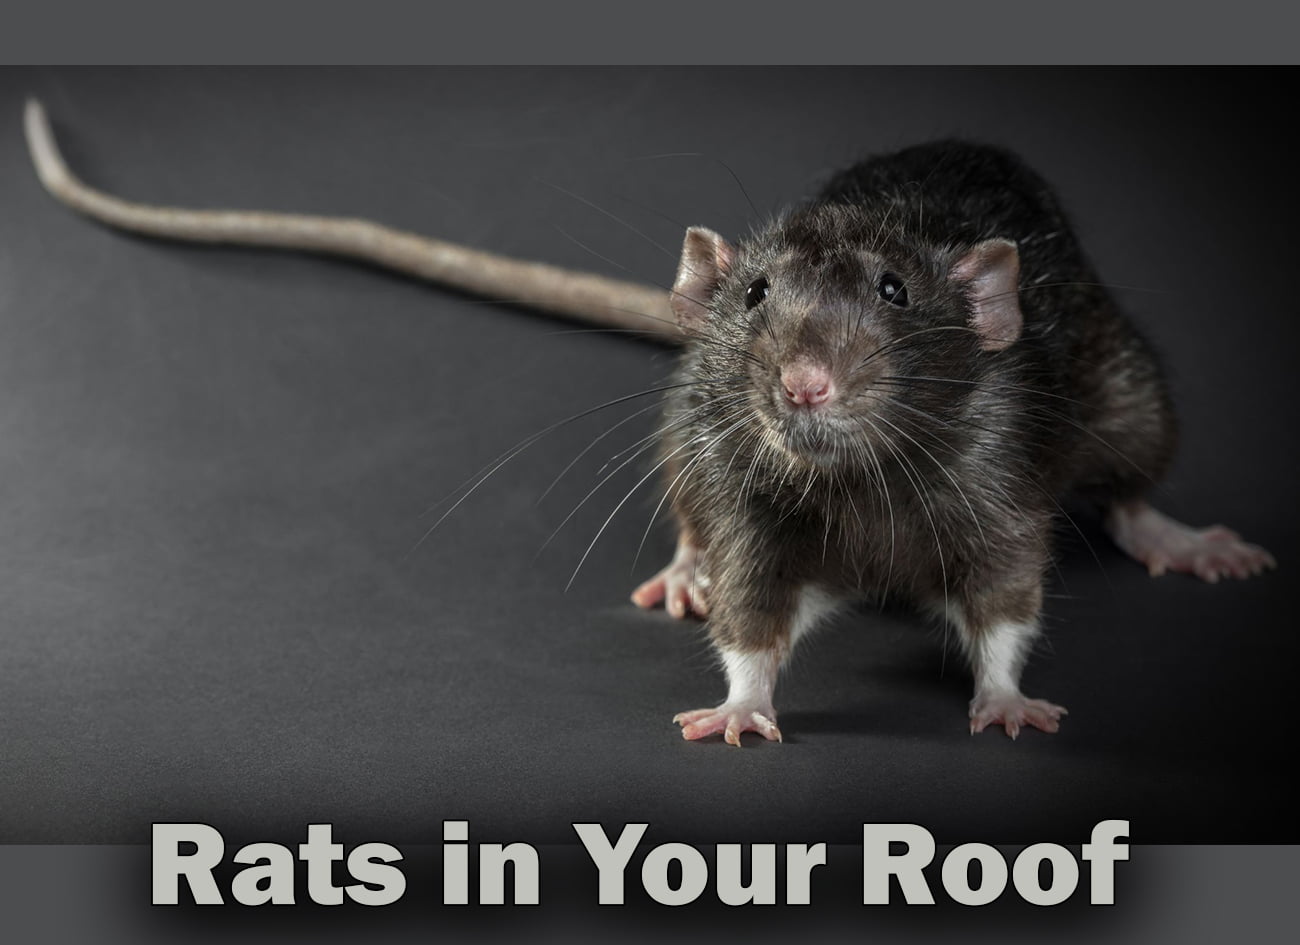 How to get rid of rats in your roof